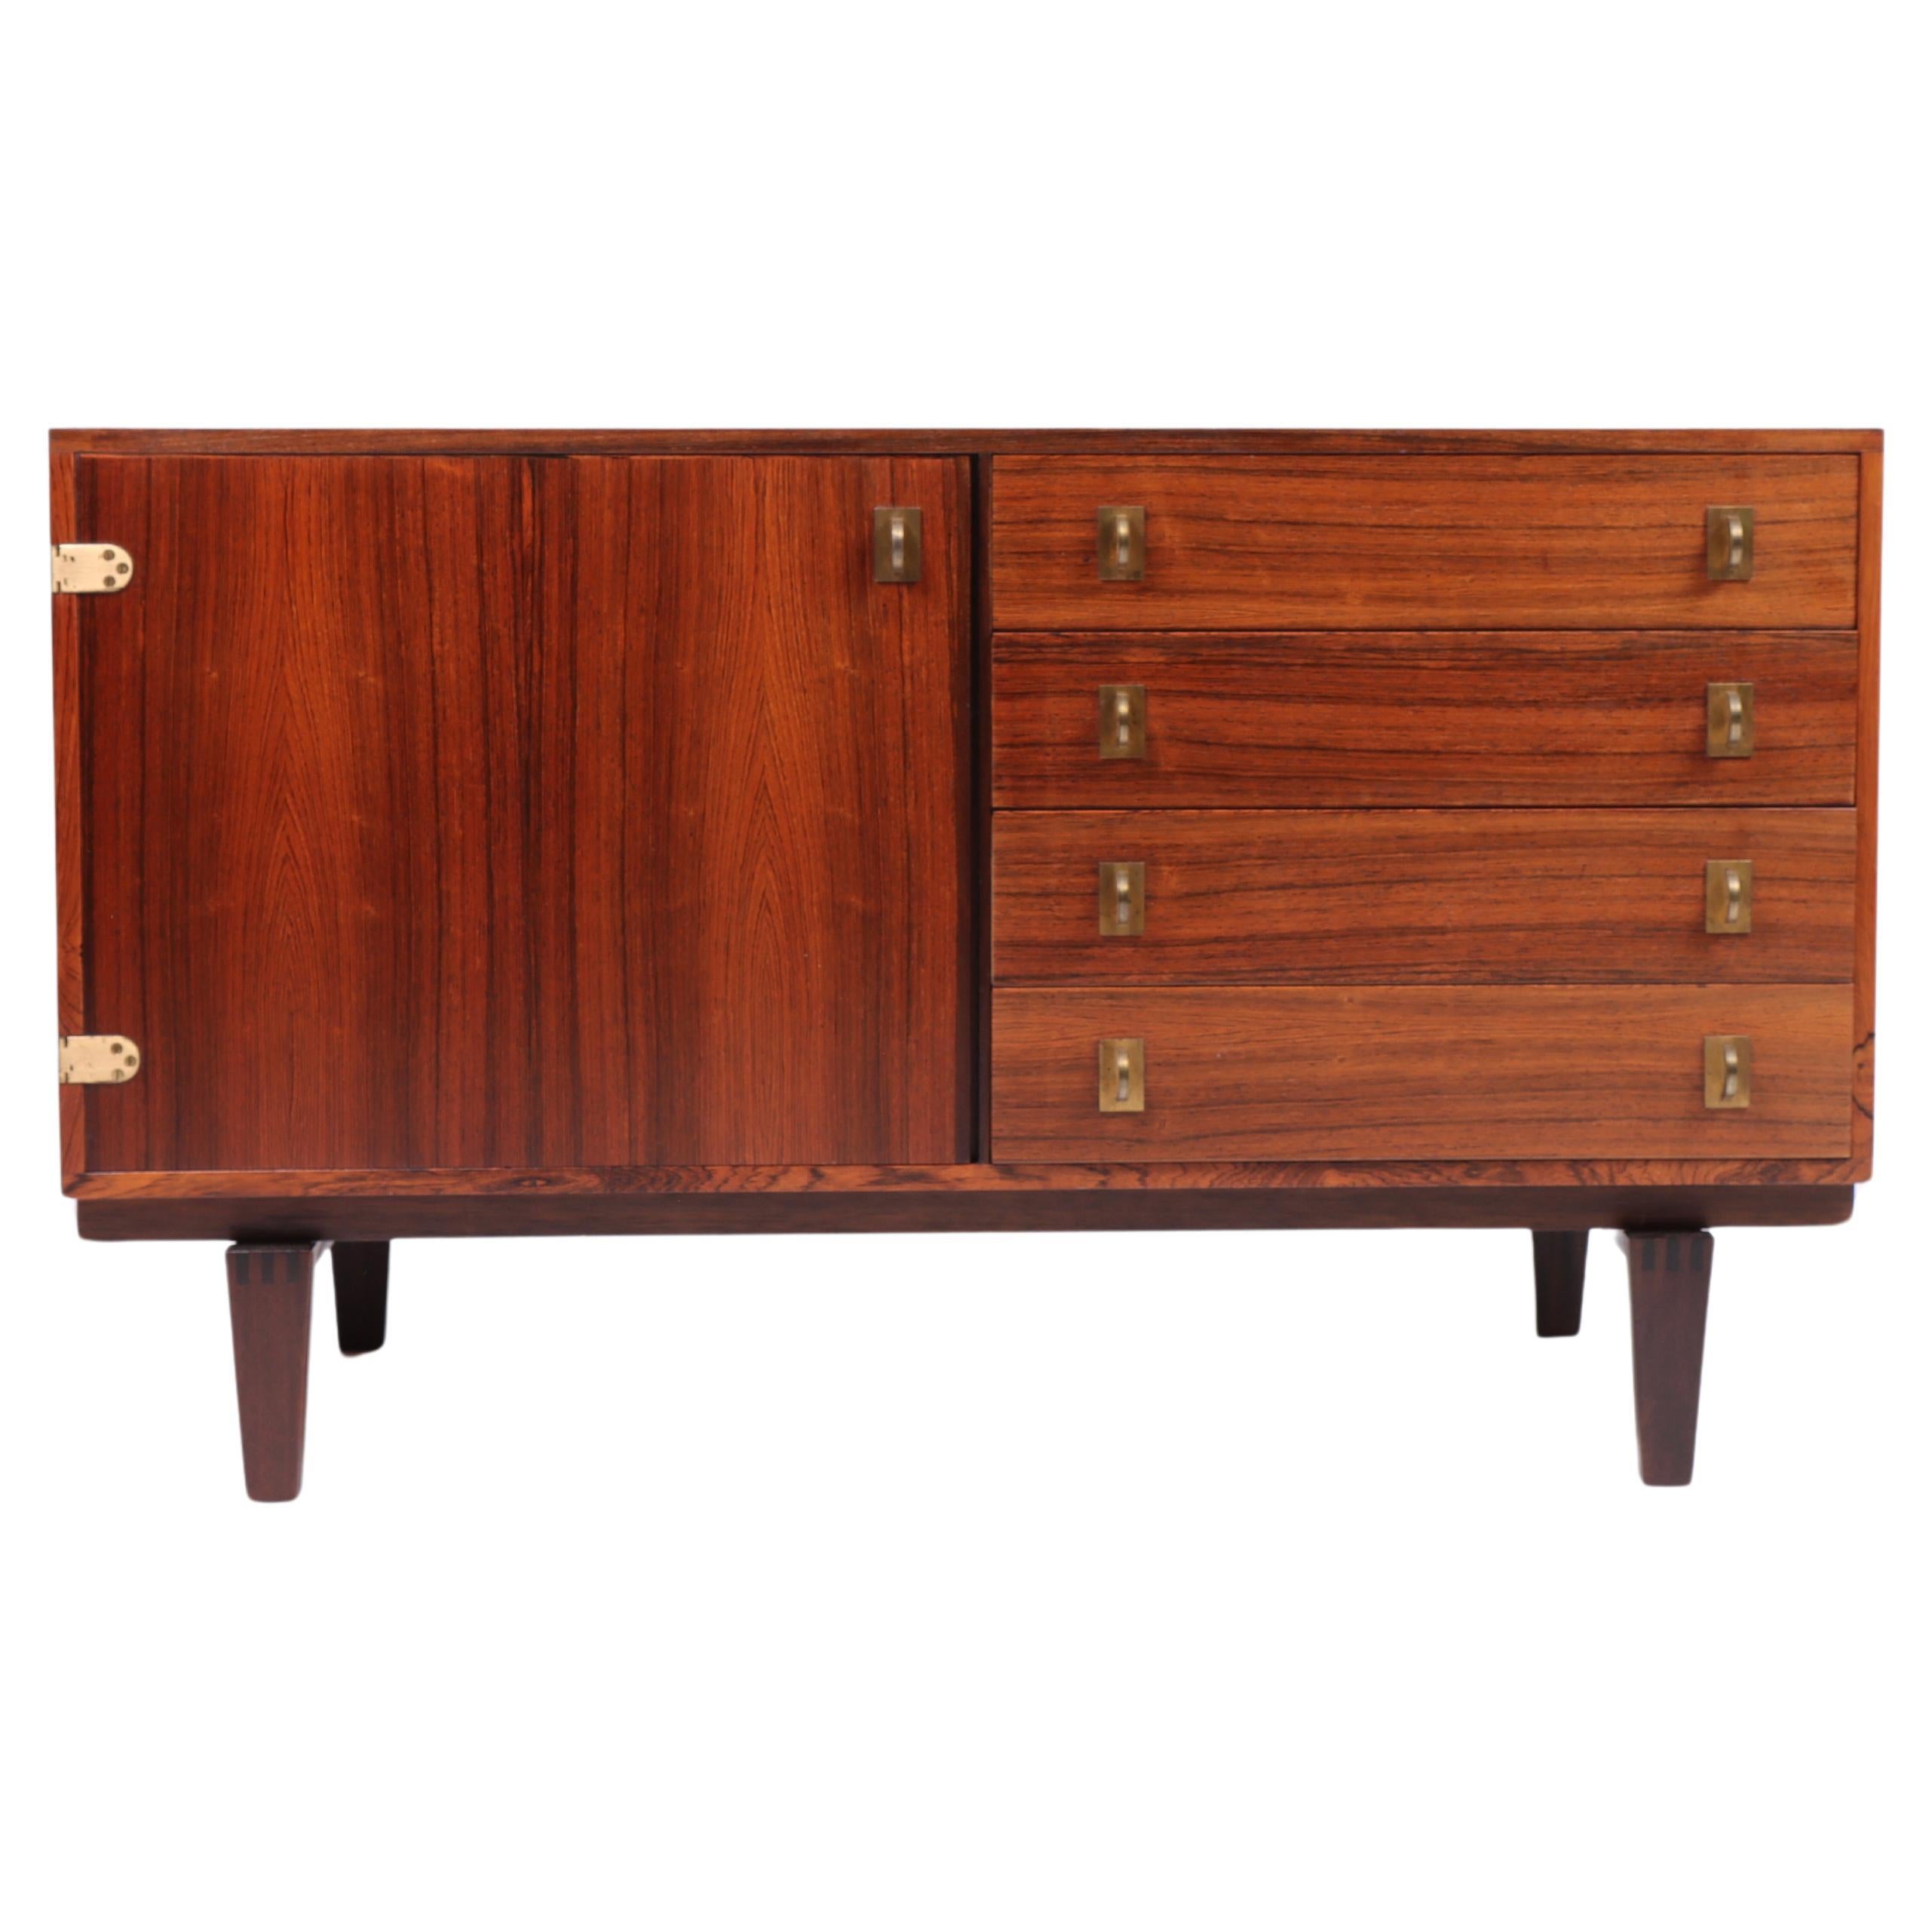 Midcentury Low Cabinet in Rosewood with Brass Hardware by Løgvig, Denmark, 1960s